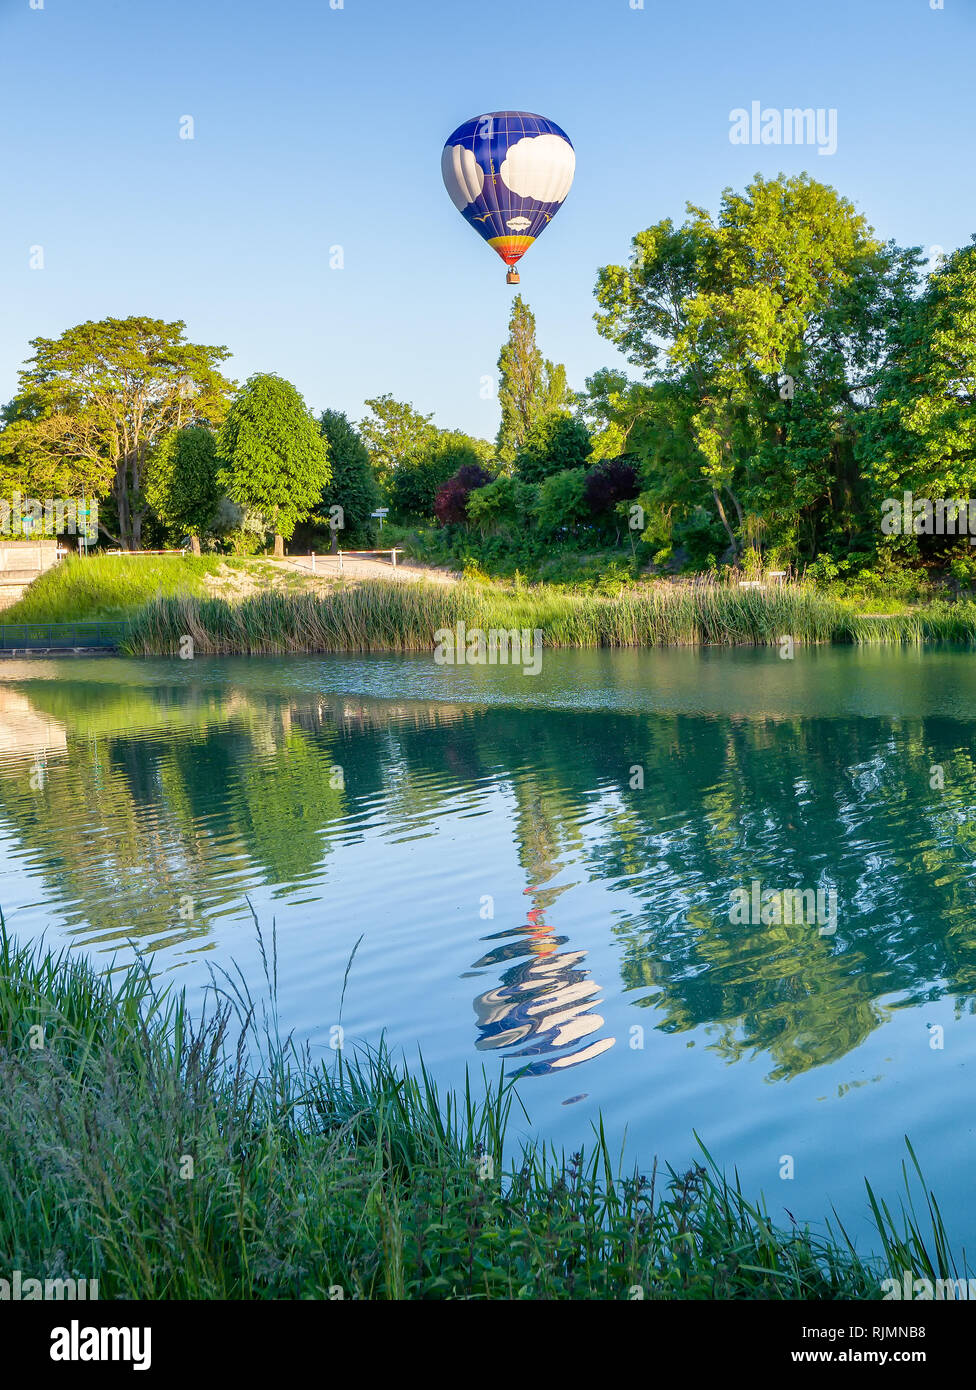 A hot air balloon flying beside the River Marne and reflected in it.  This is near the the village of Mareuil-sur-Ay in the Champagne Region of France Stock Photo